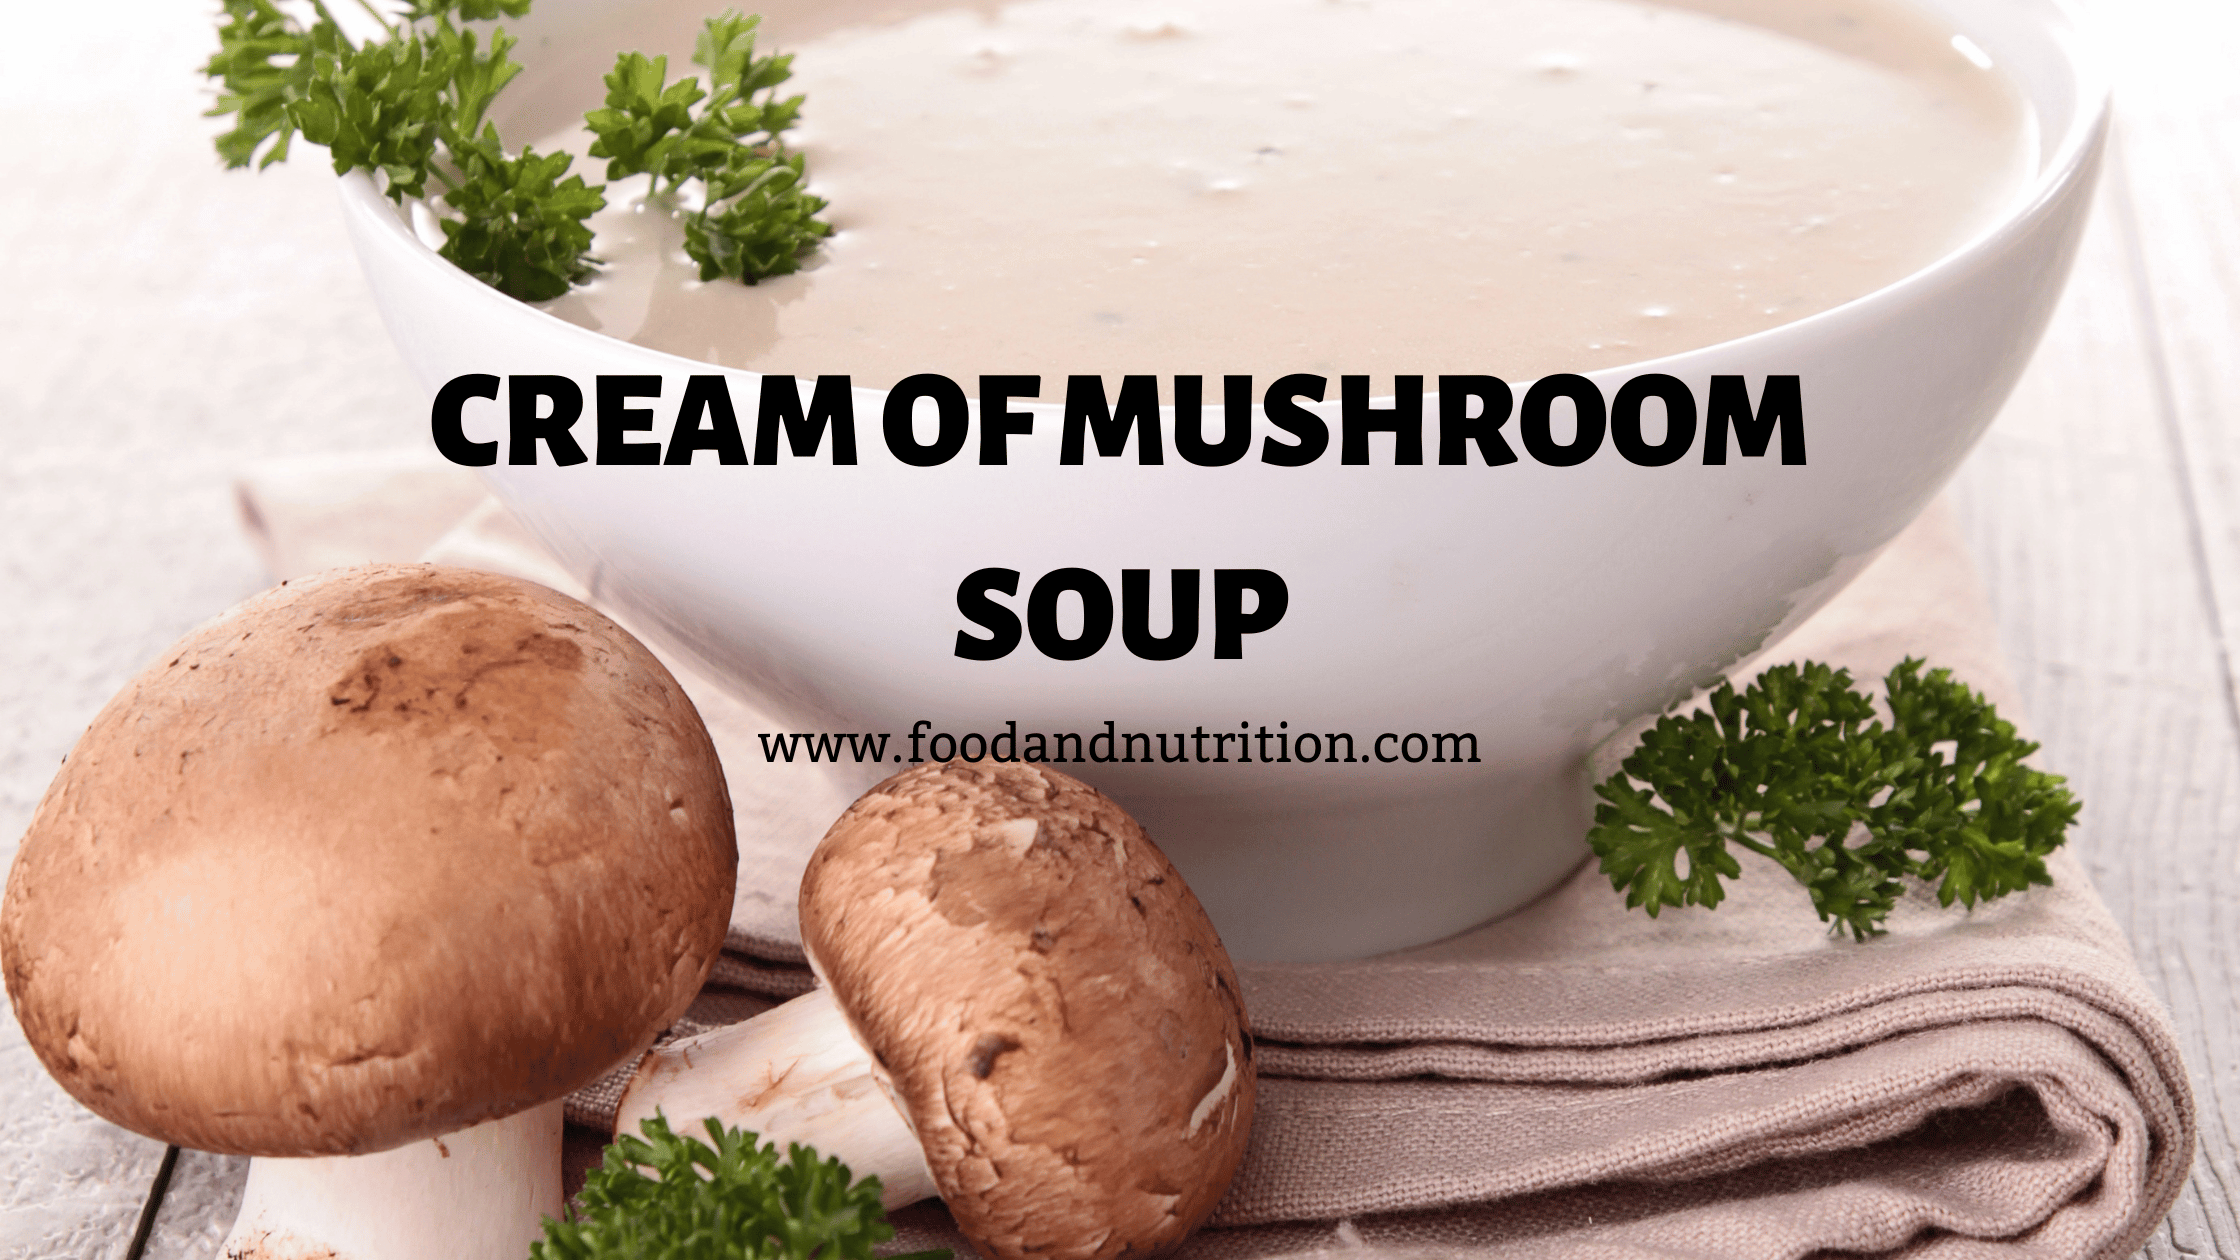 Cream of Mushroom Soup: A Timeless Classic for Comfort and Flavor